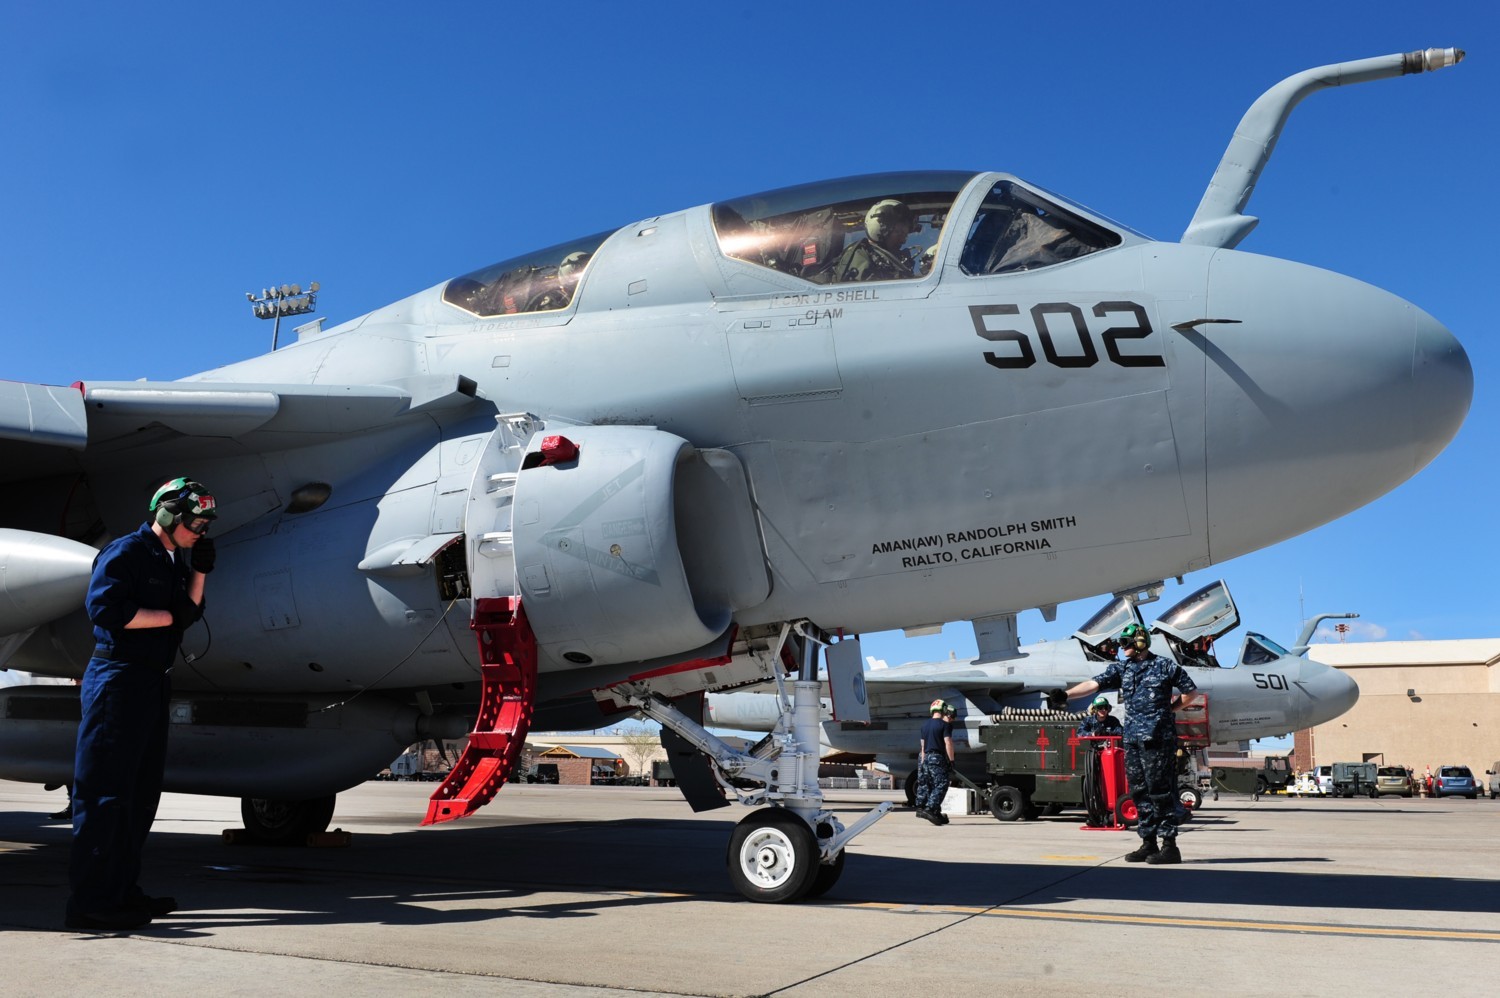 vaq-139 cougars electronic attack squadron us navy ea-6b prowler cvw-14 exercise red flag nellis afb nevada 175